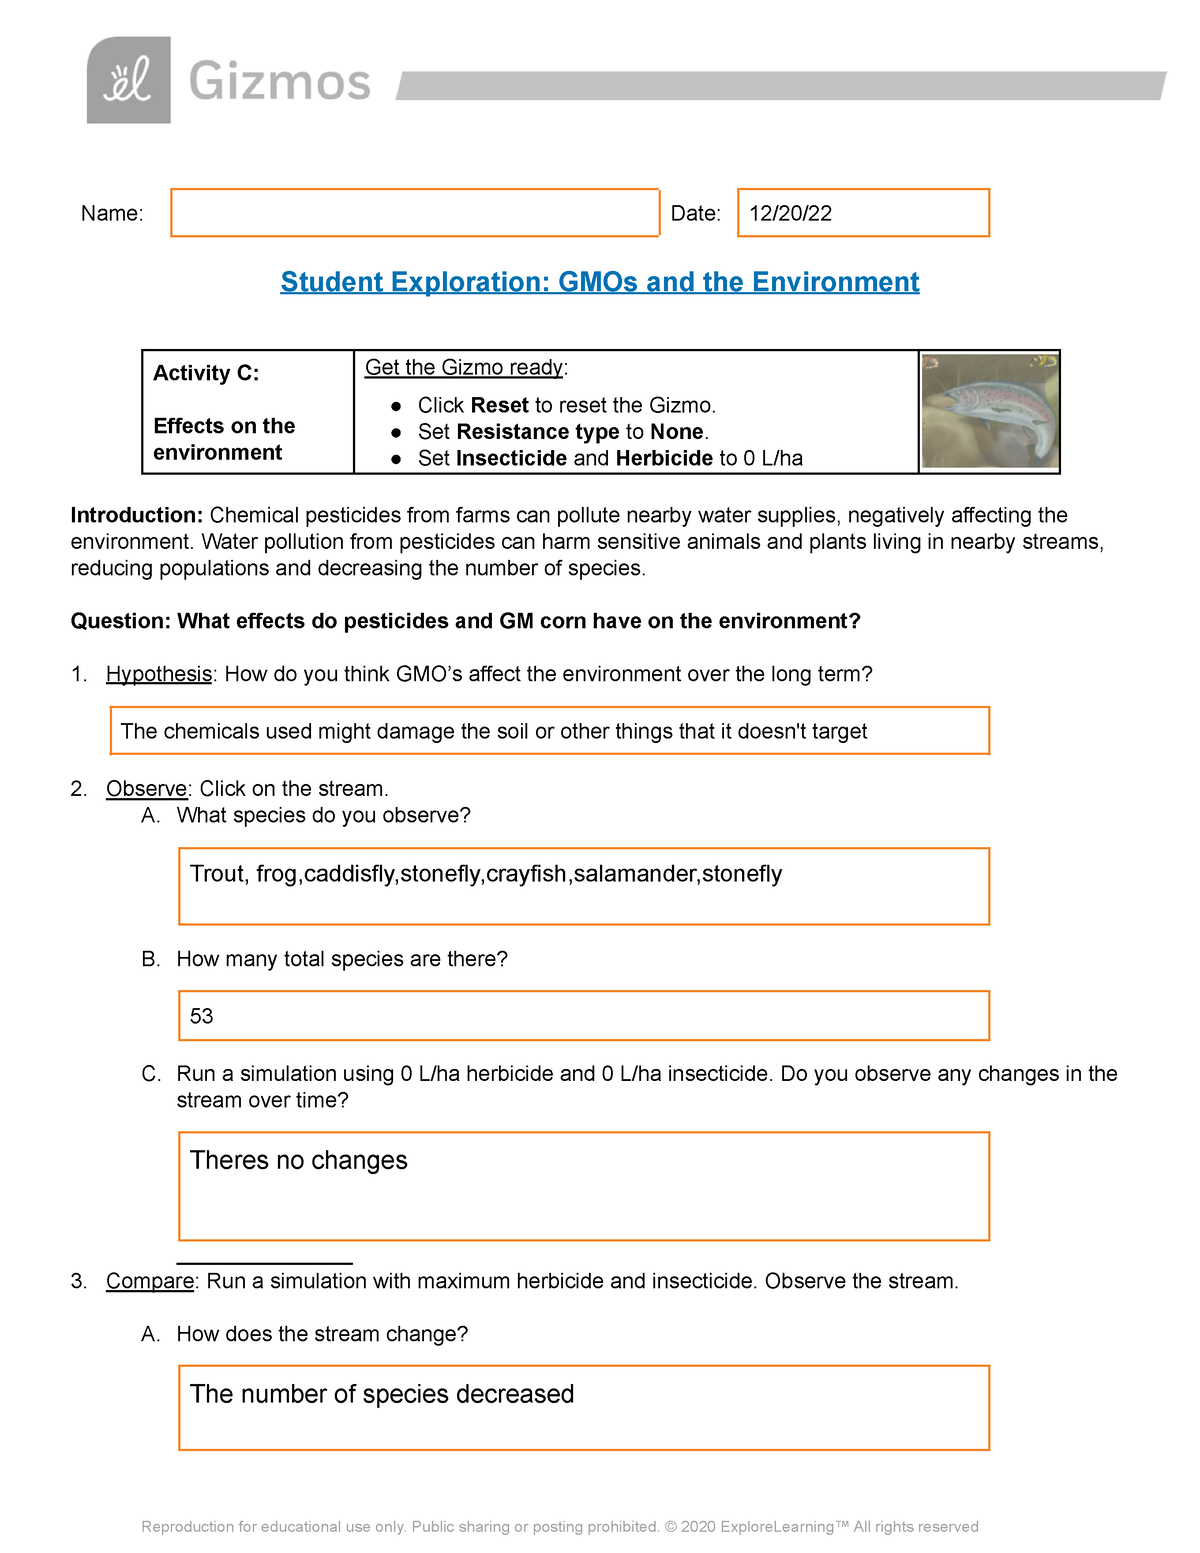 GMOs and the Environment - Name: Date: 12/20/ Student Exploration: GMOs